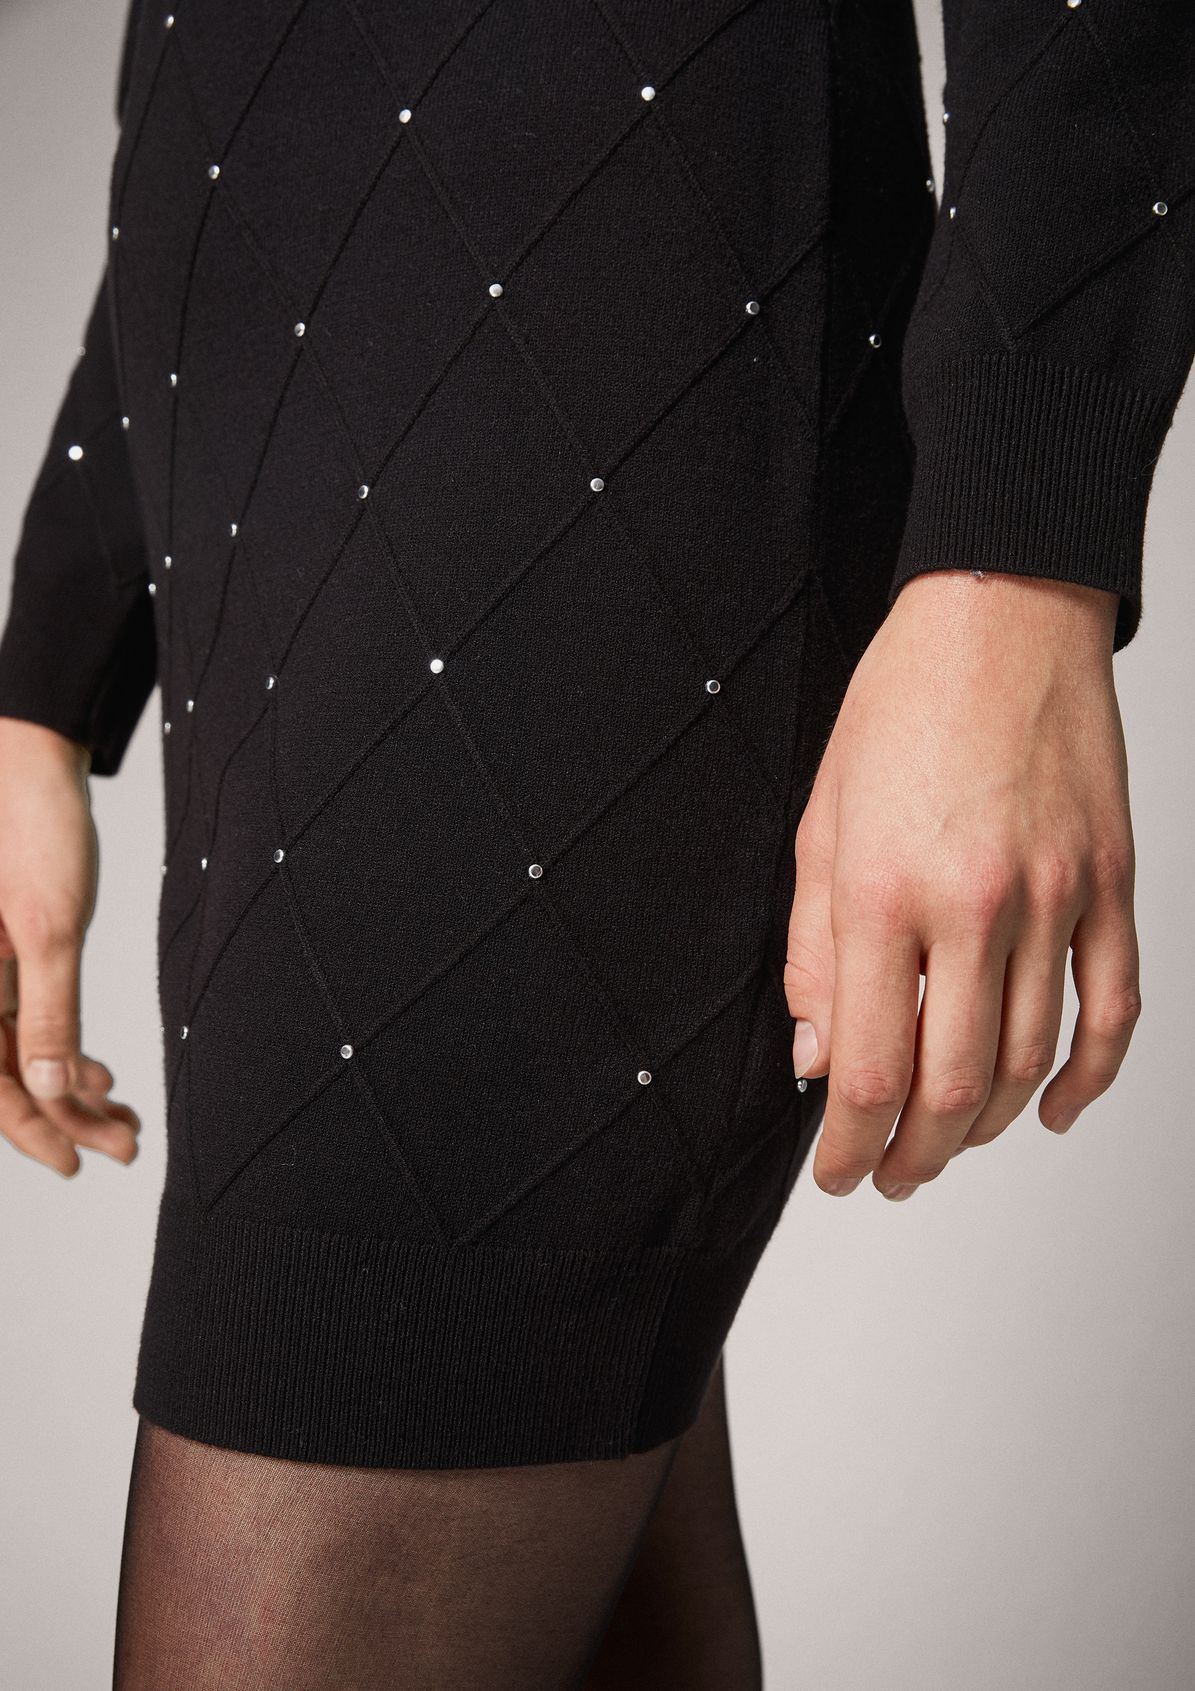 Textured dress with gemstones from comma